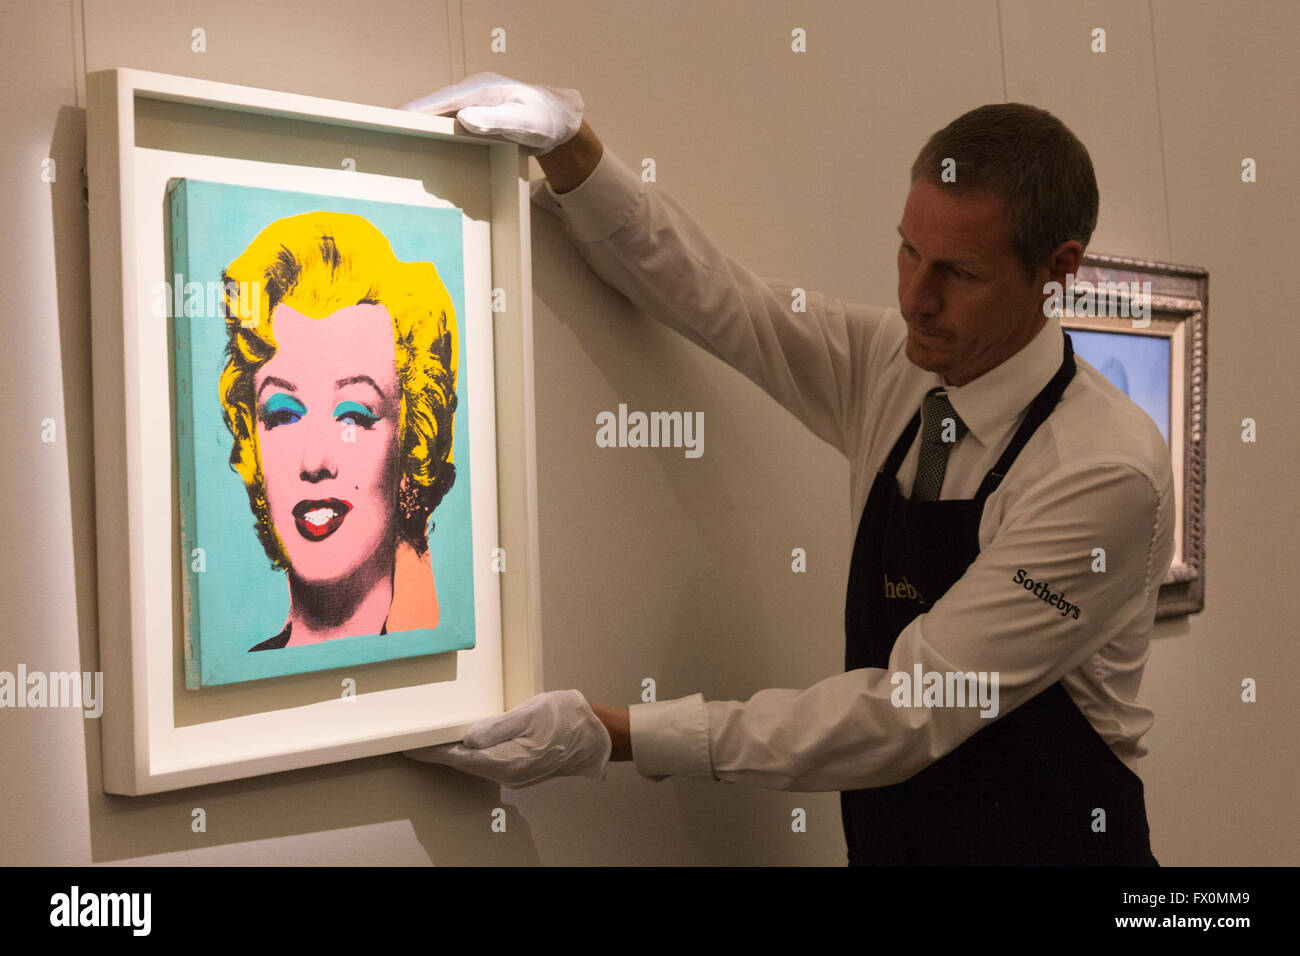 London, UK. 8 April 2016. A Sotheby's employee handles the artwork Warhol's Marilyn Monroe, 1967, by Elaine Sturtevant, known as the Queen of Copycats. Estimate: USD 300,000-400,000.  Sotheby's London Auction Preview of art from the Contemporary Art Evening Auction in New York on 11 May 2016. Stock Photo